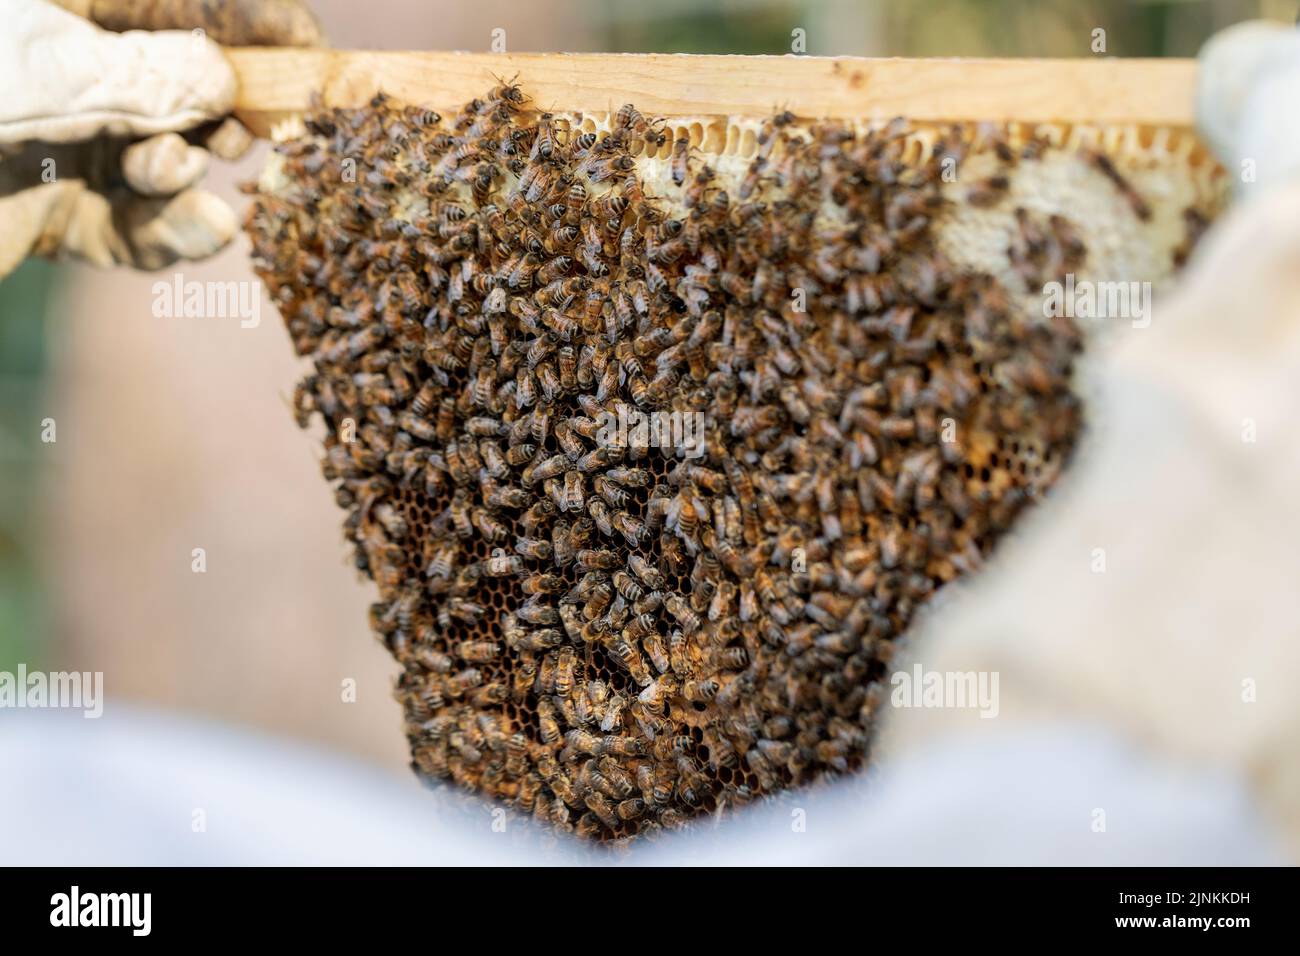 A beekeeper inspects a bee colony on a natural  honeycomb. Stock Photo